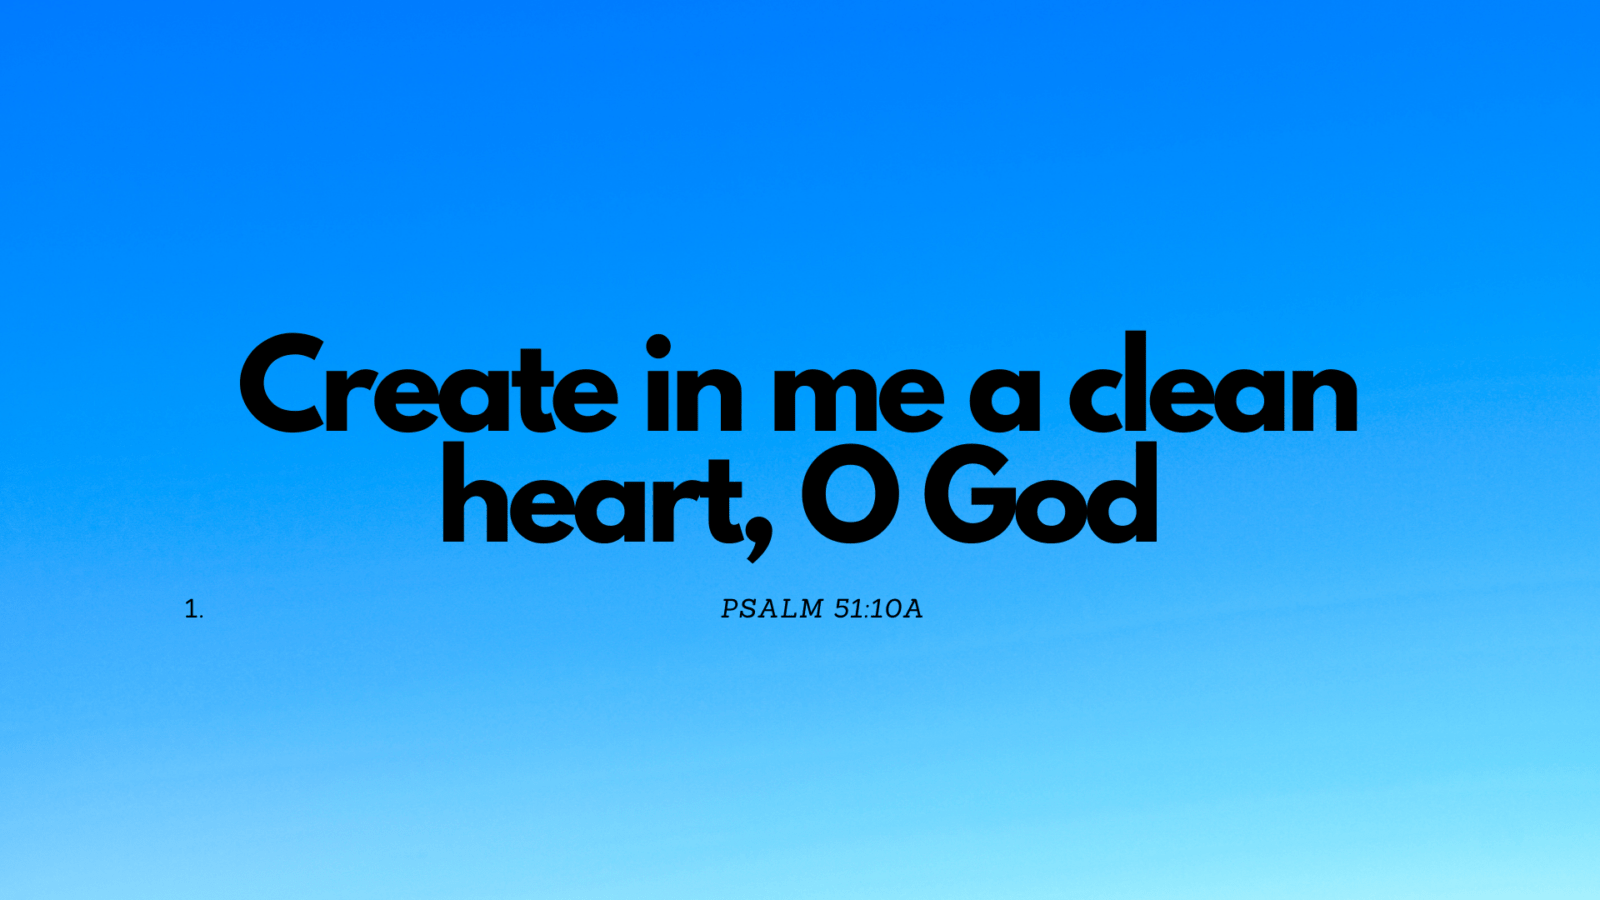 Create in me a clean heart, O God, and renew a right spirit within me. (1)